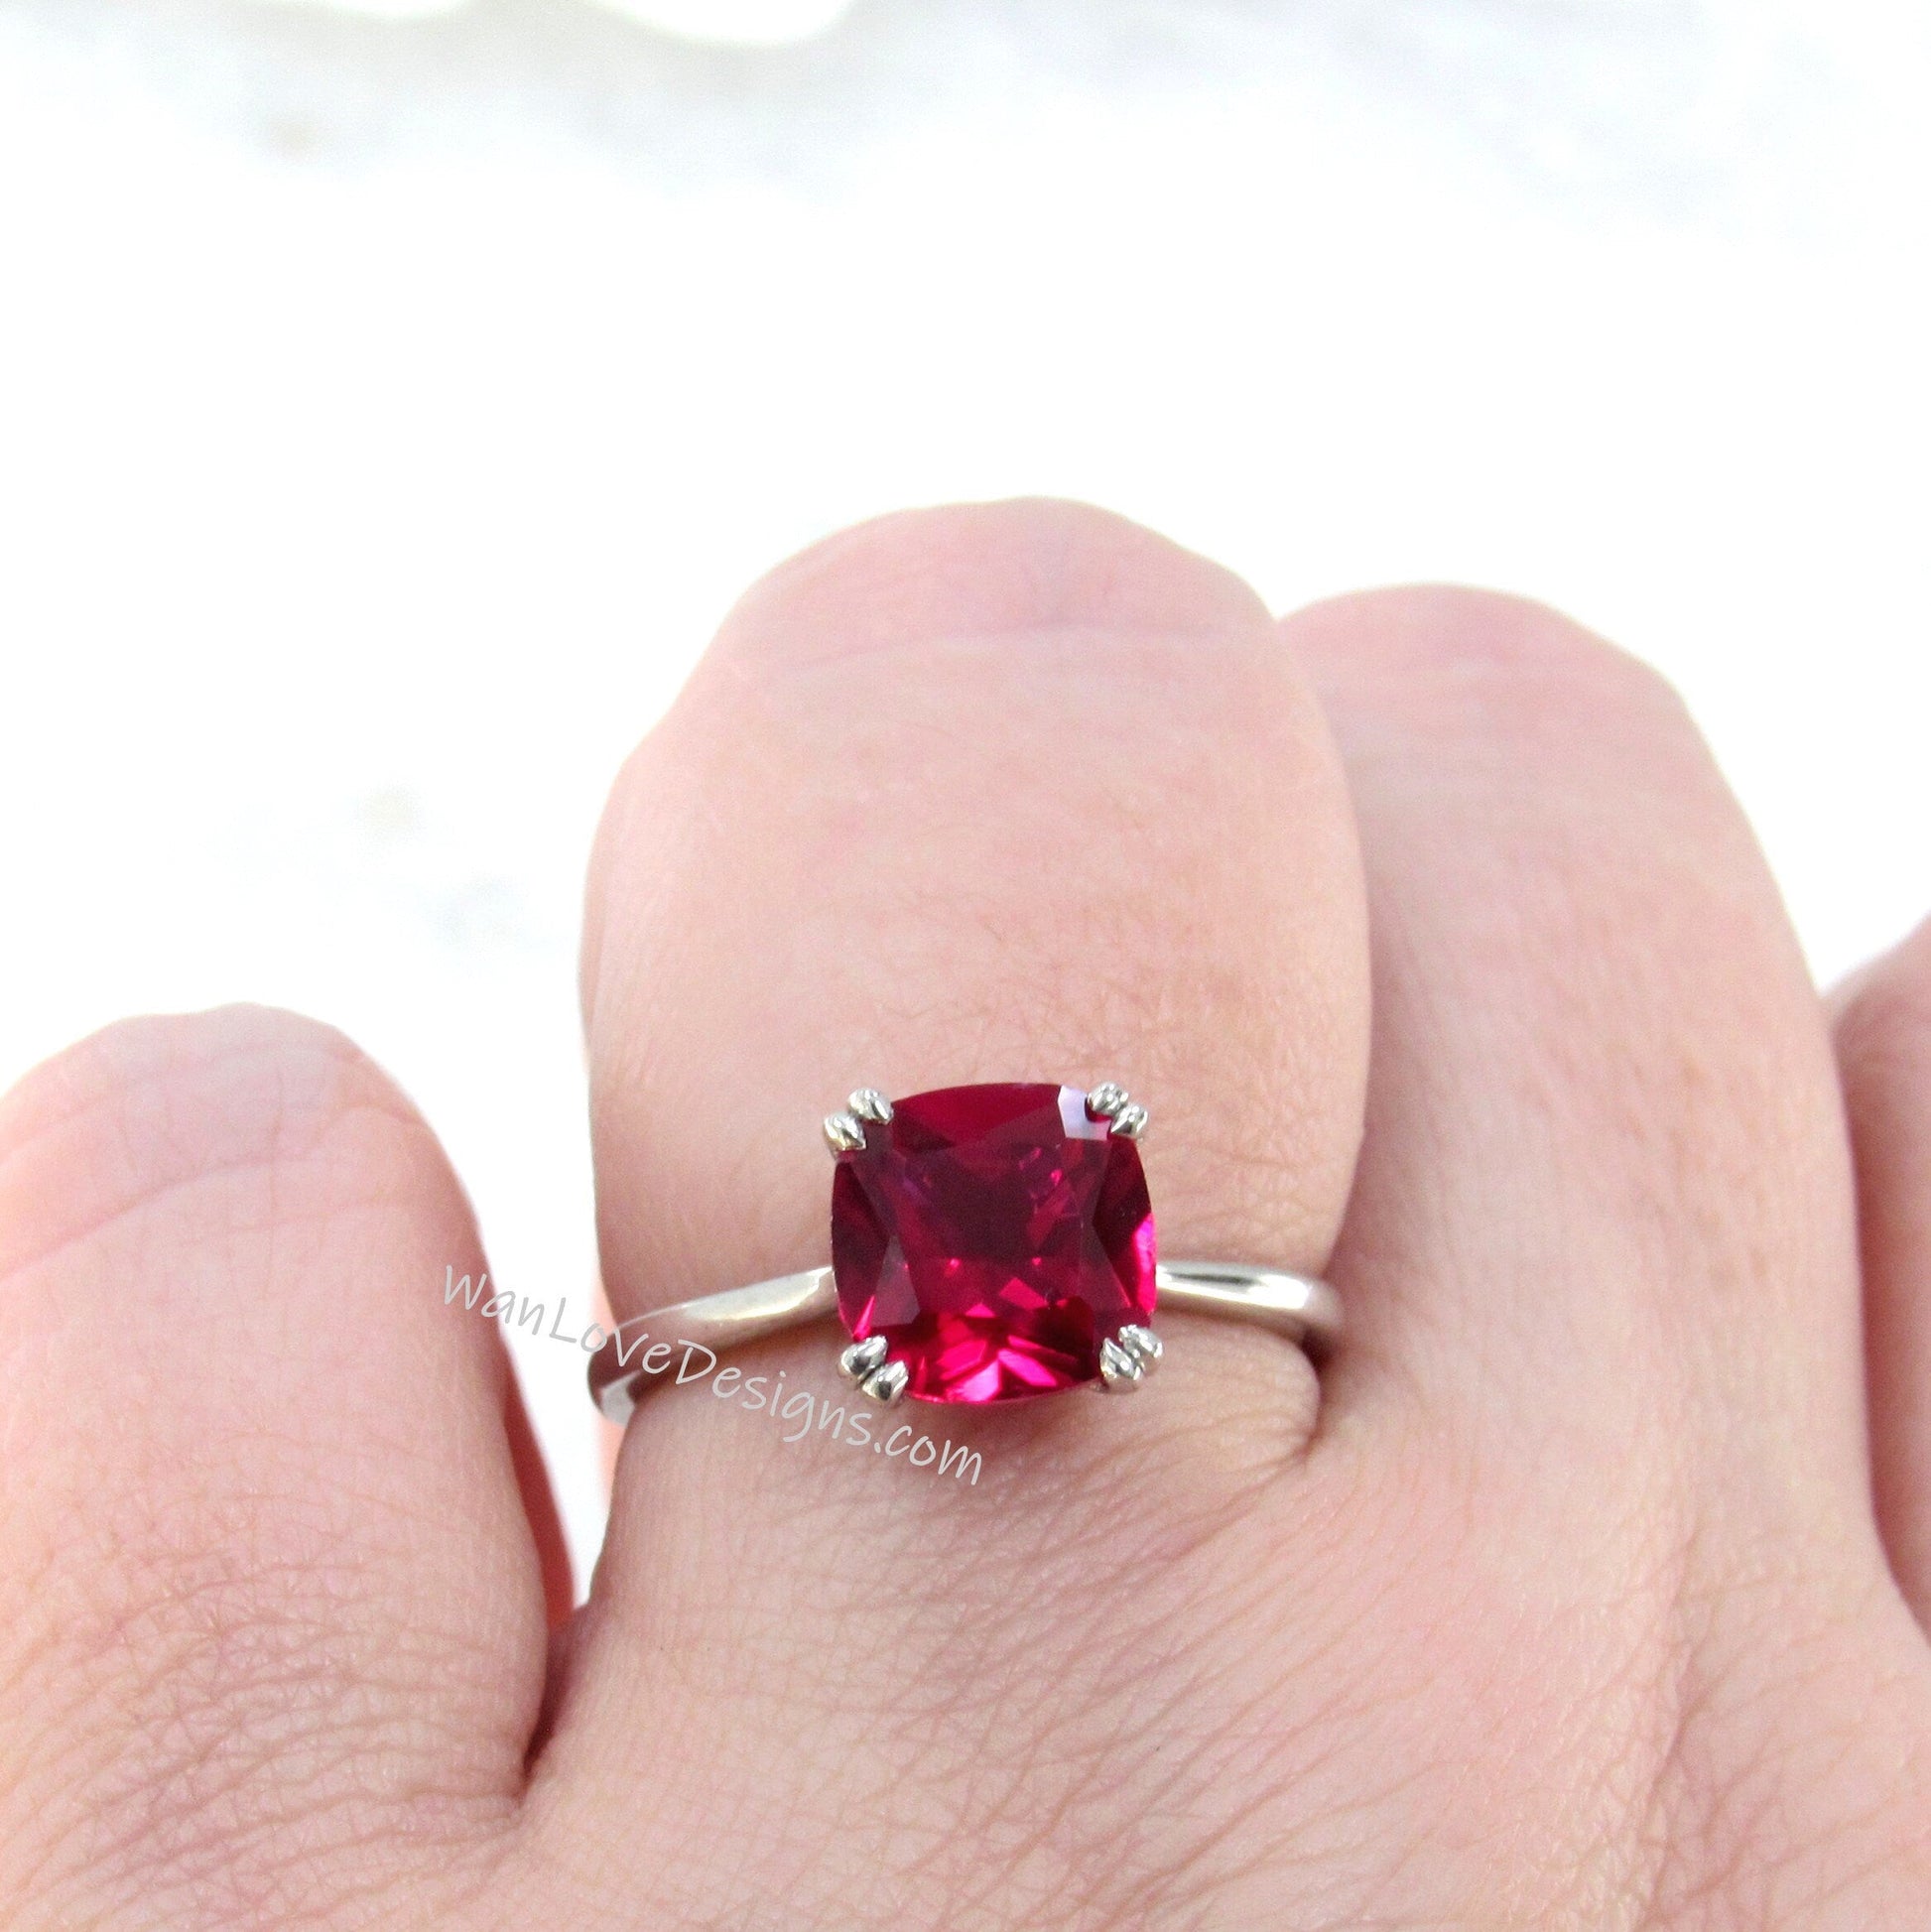 Cushion Ruby Solitaire Engagement Ring in 14k White Rose Yellow Gold, Custom Cushion Ruby Wedding Ring,Birthstone Bridal Ring WanLoveDesigns Wan Love Designs